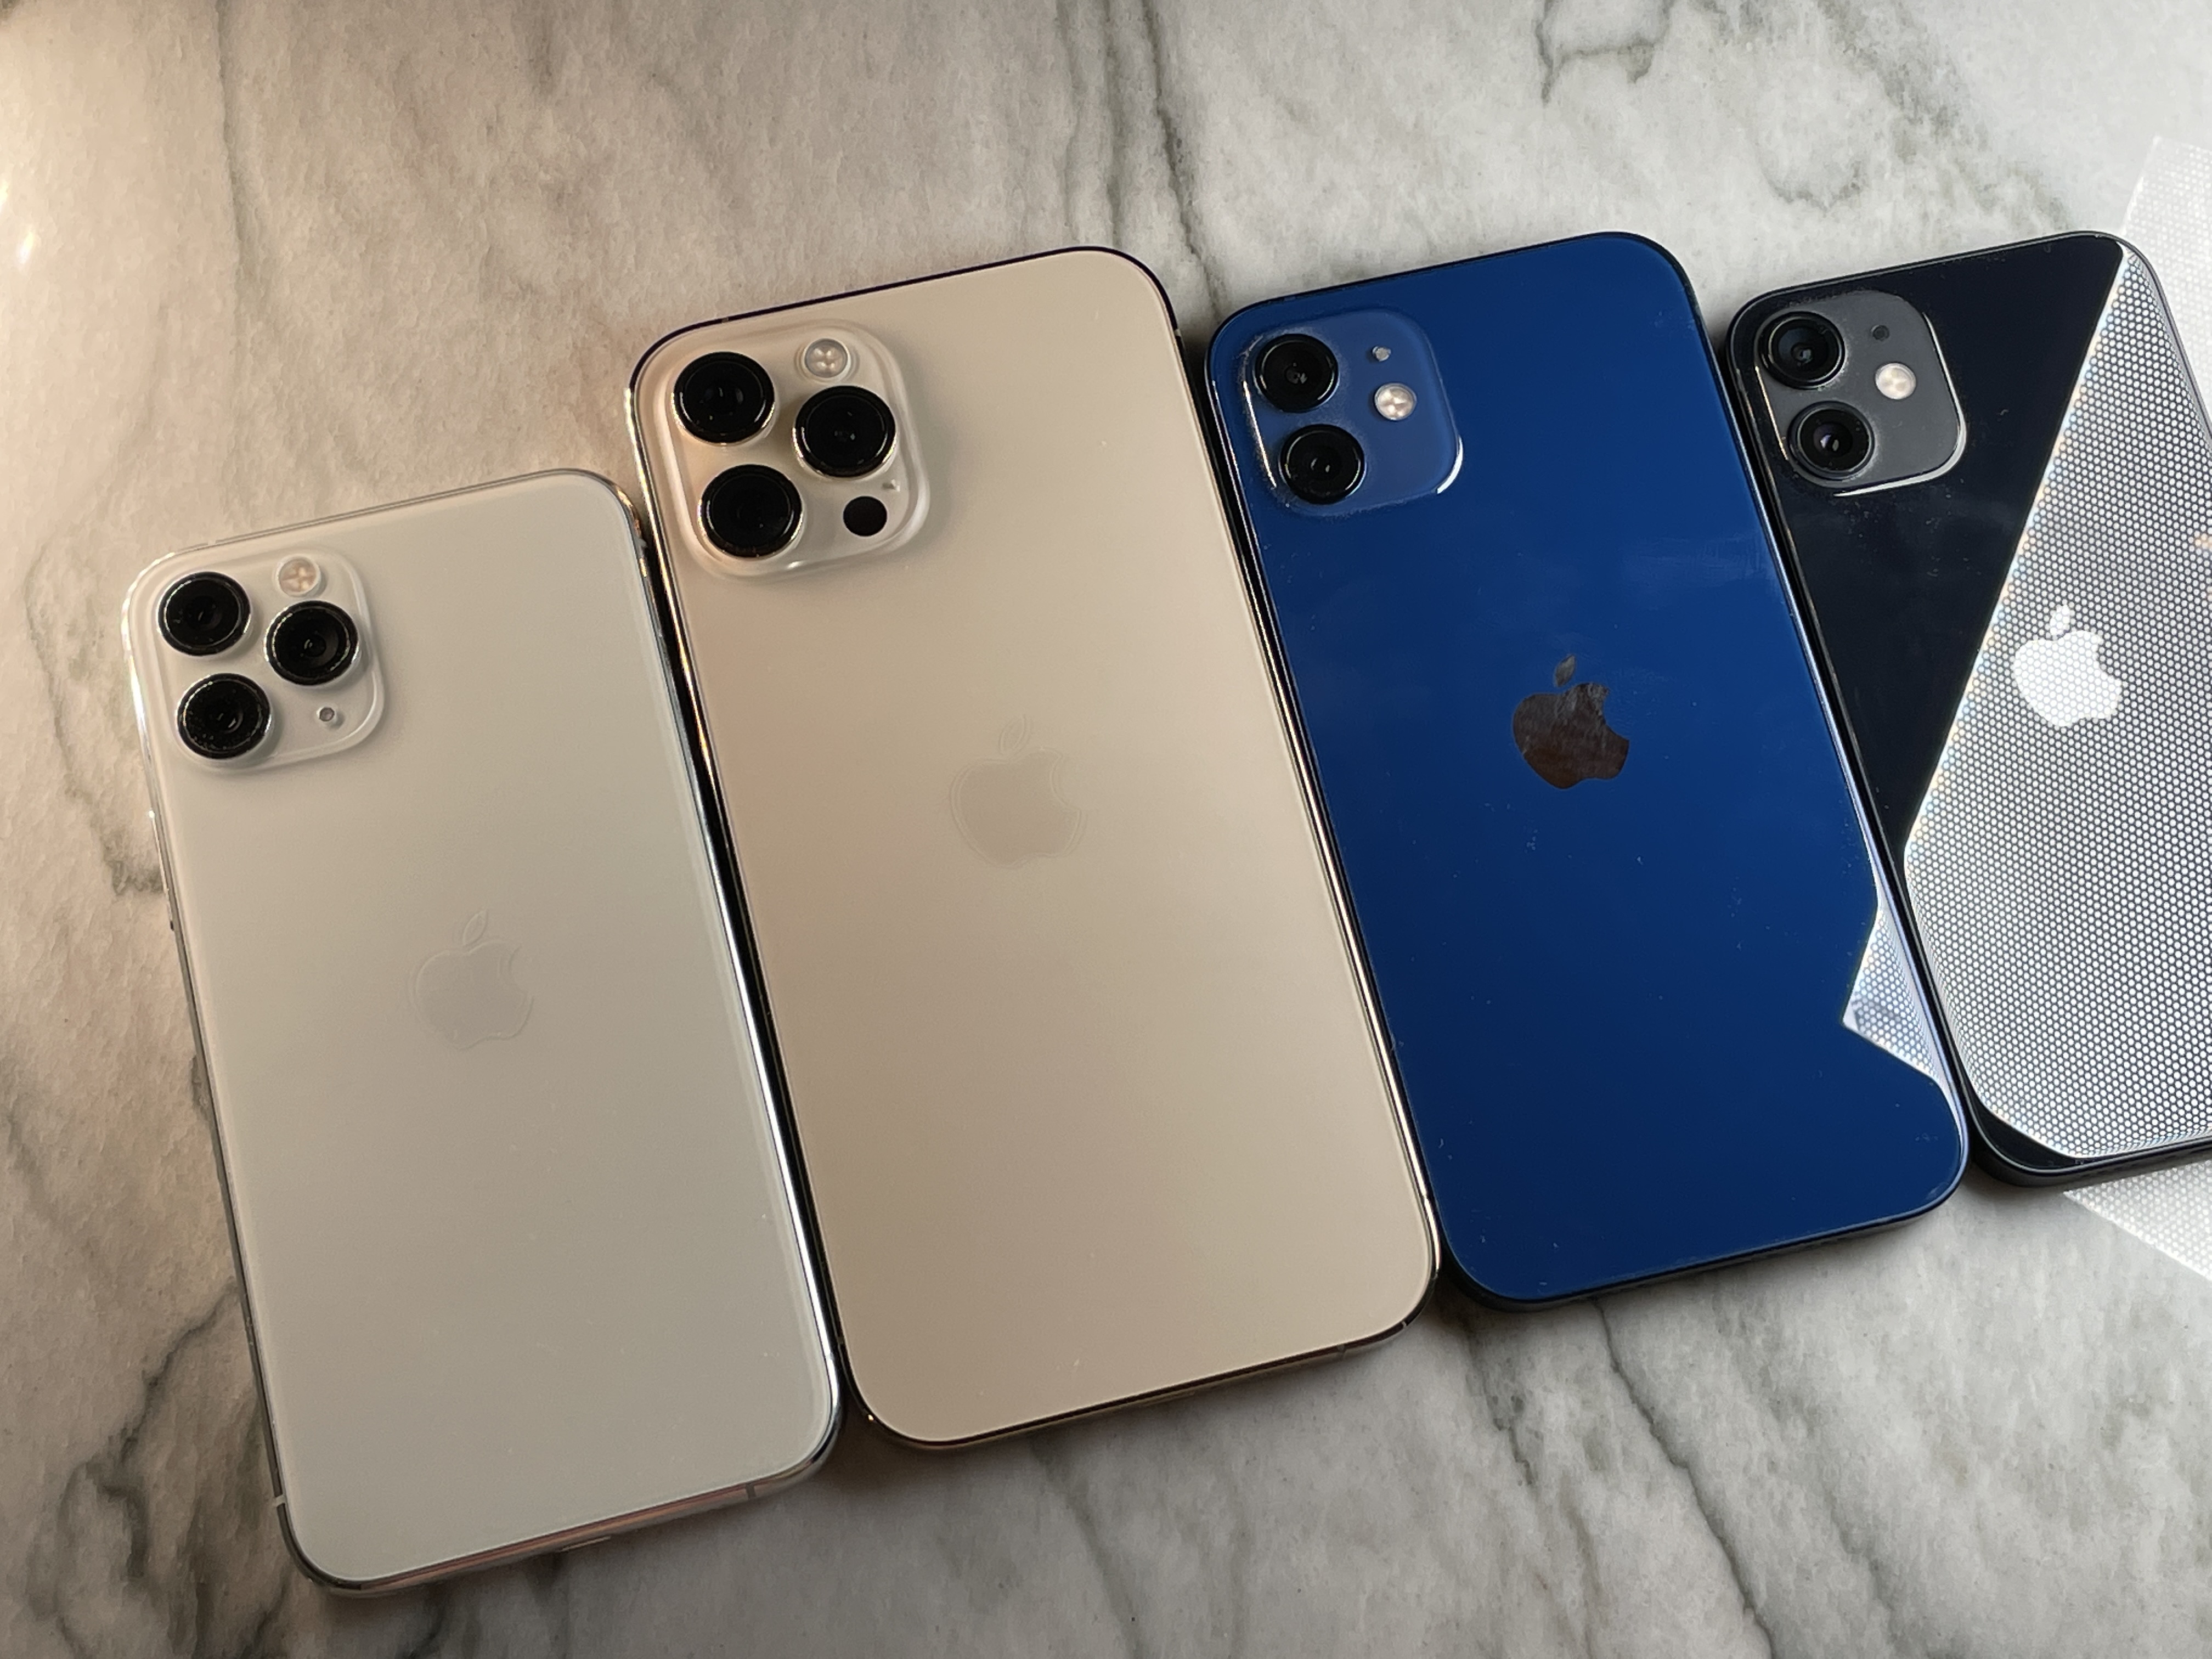 Review: The iPhone 12 Pro Max is worth its handling fee – TechCrunch